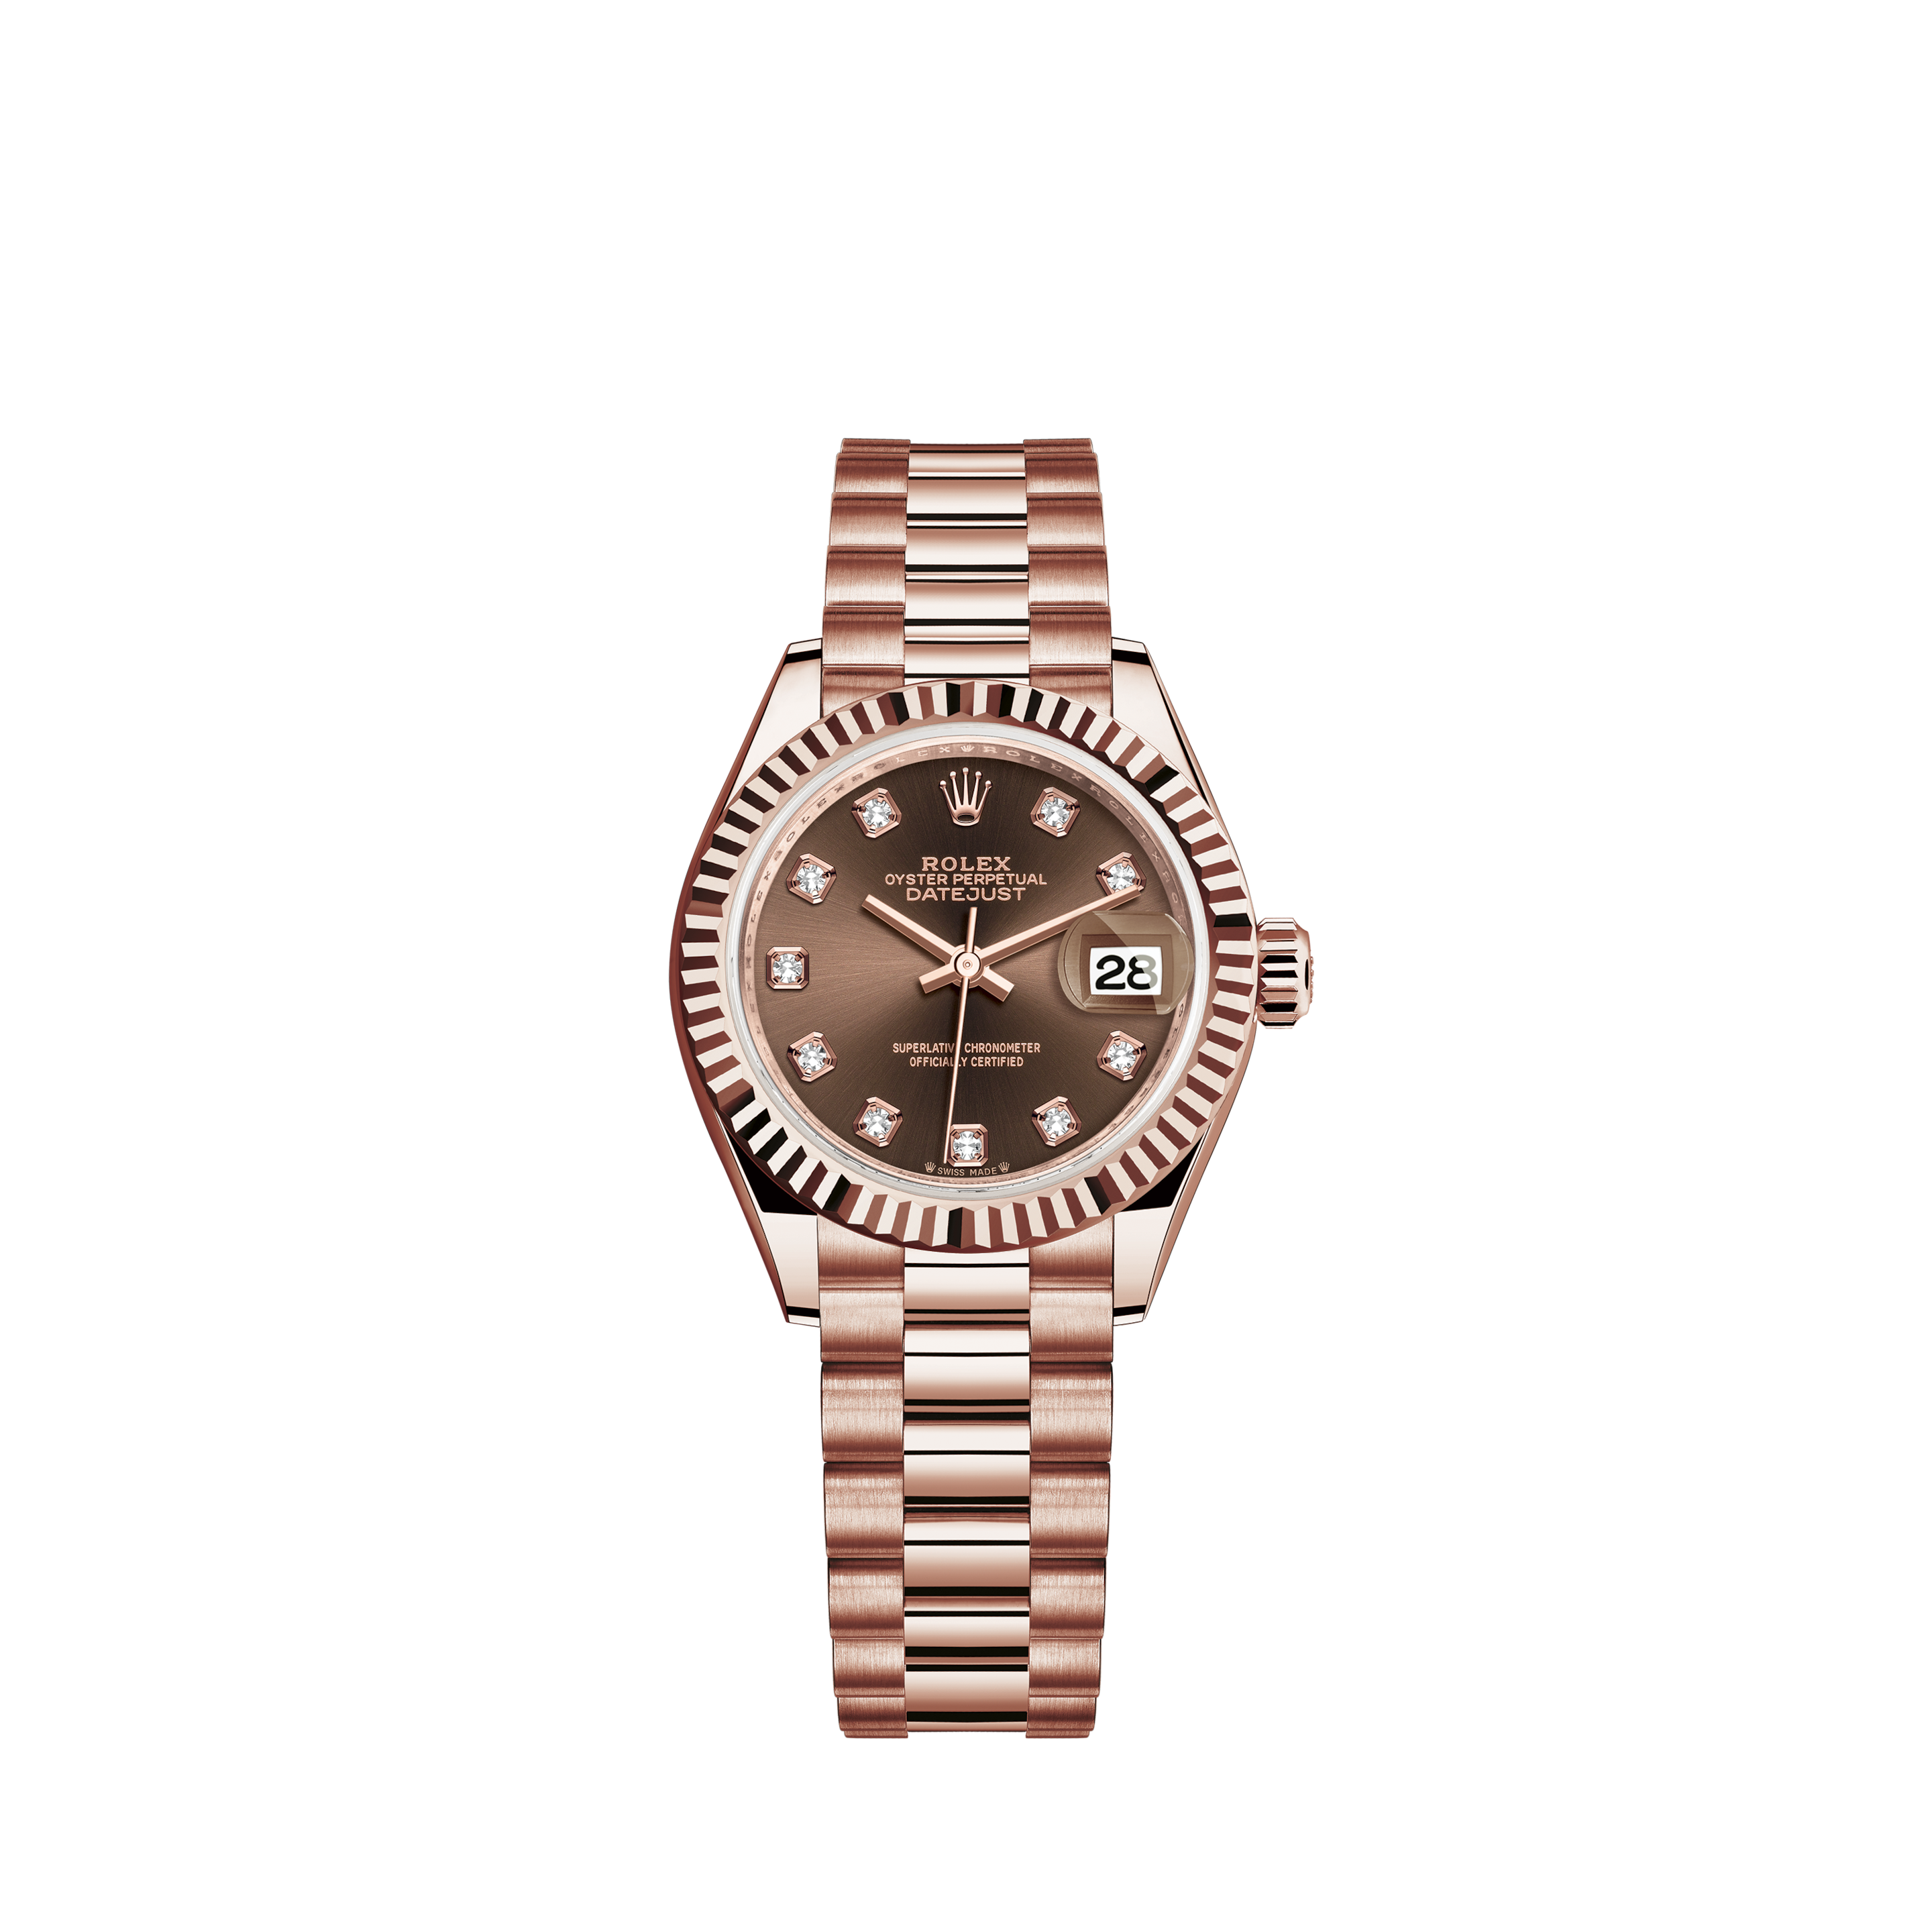 Rolex Datejust 31mm Stainless Steel 278274 Pink Diamond OysterRolex Datejust 31mm Stainless Steel 278274 Pink Roman Oyster